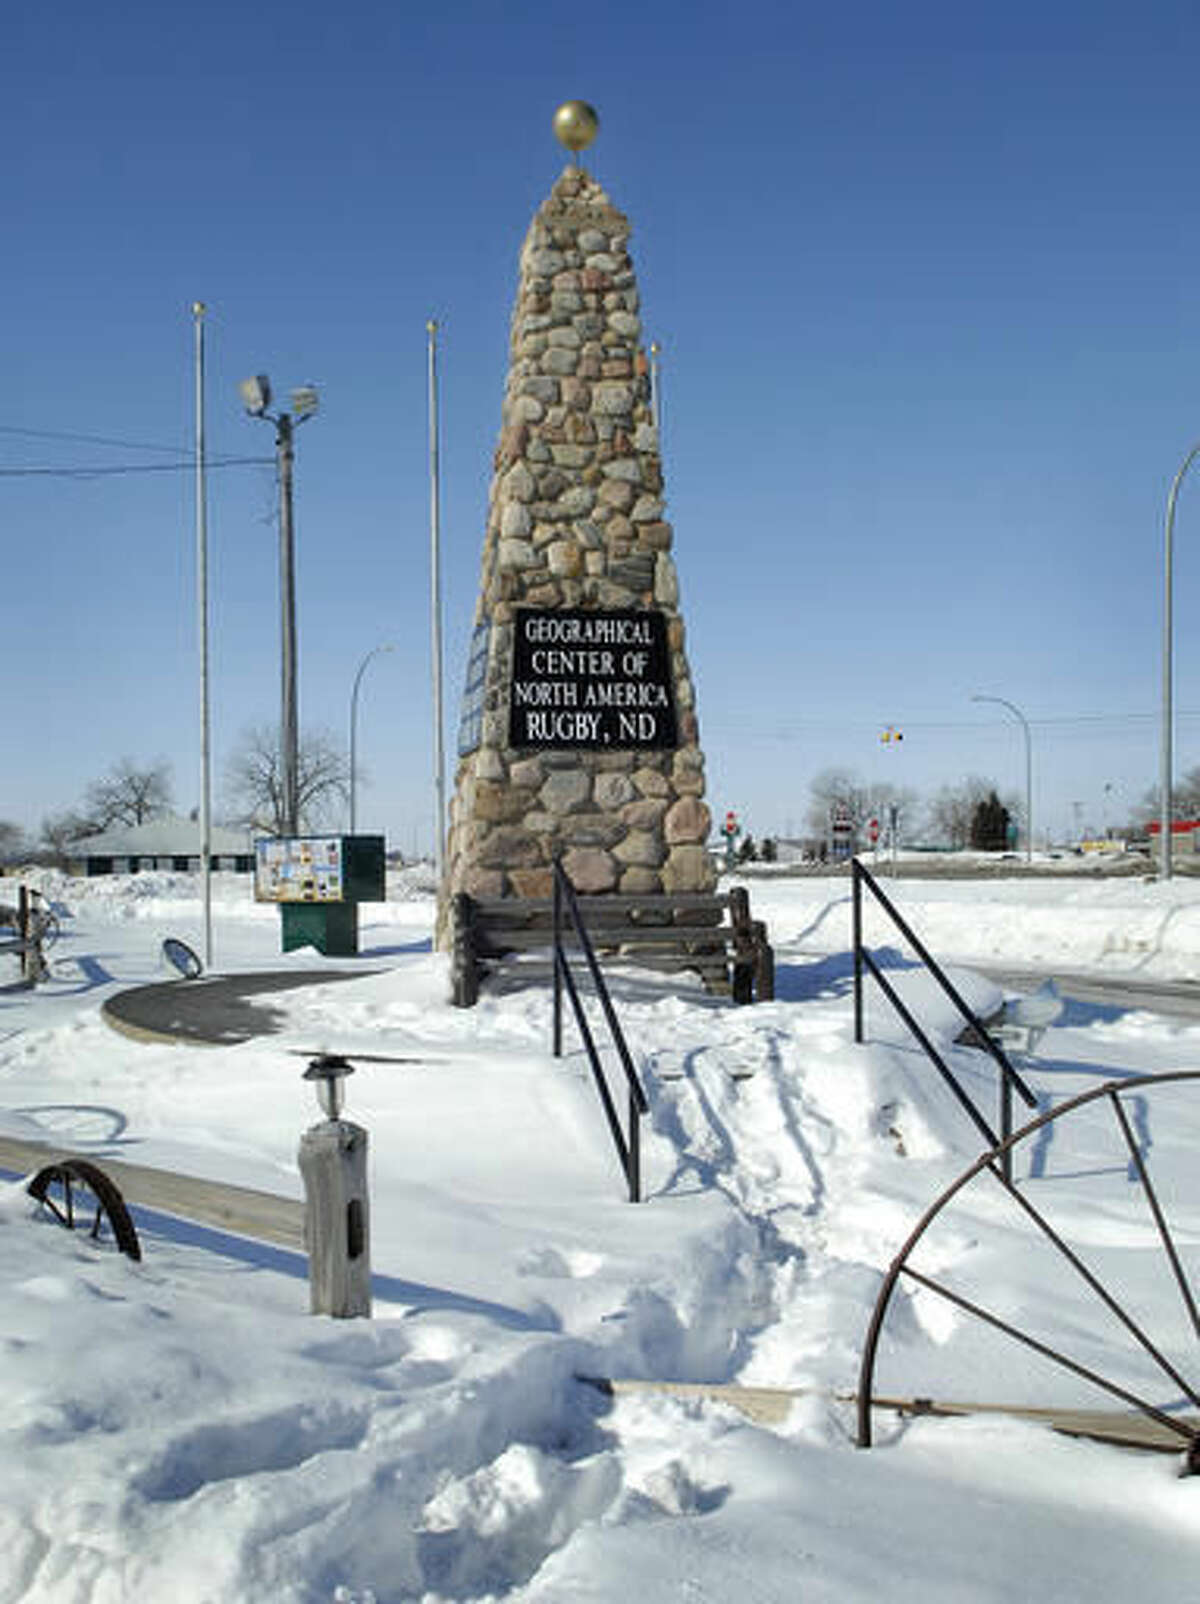 FILE - In this March 1, 2010 file photo, a twenty one foot tall obelisk marks the spot the town of Rugby says is the Geographic center of North America, in Rugby N.D. The town built the obelisk in 1932 and has trademarked the title. Hanson's Bar in Robinson is now touting its continental bull's-eye status after snatching the title from the nearby city of Rugby that allowed its trademark to lapse. (AP Photo/Will Kincaid, File)